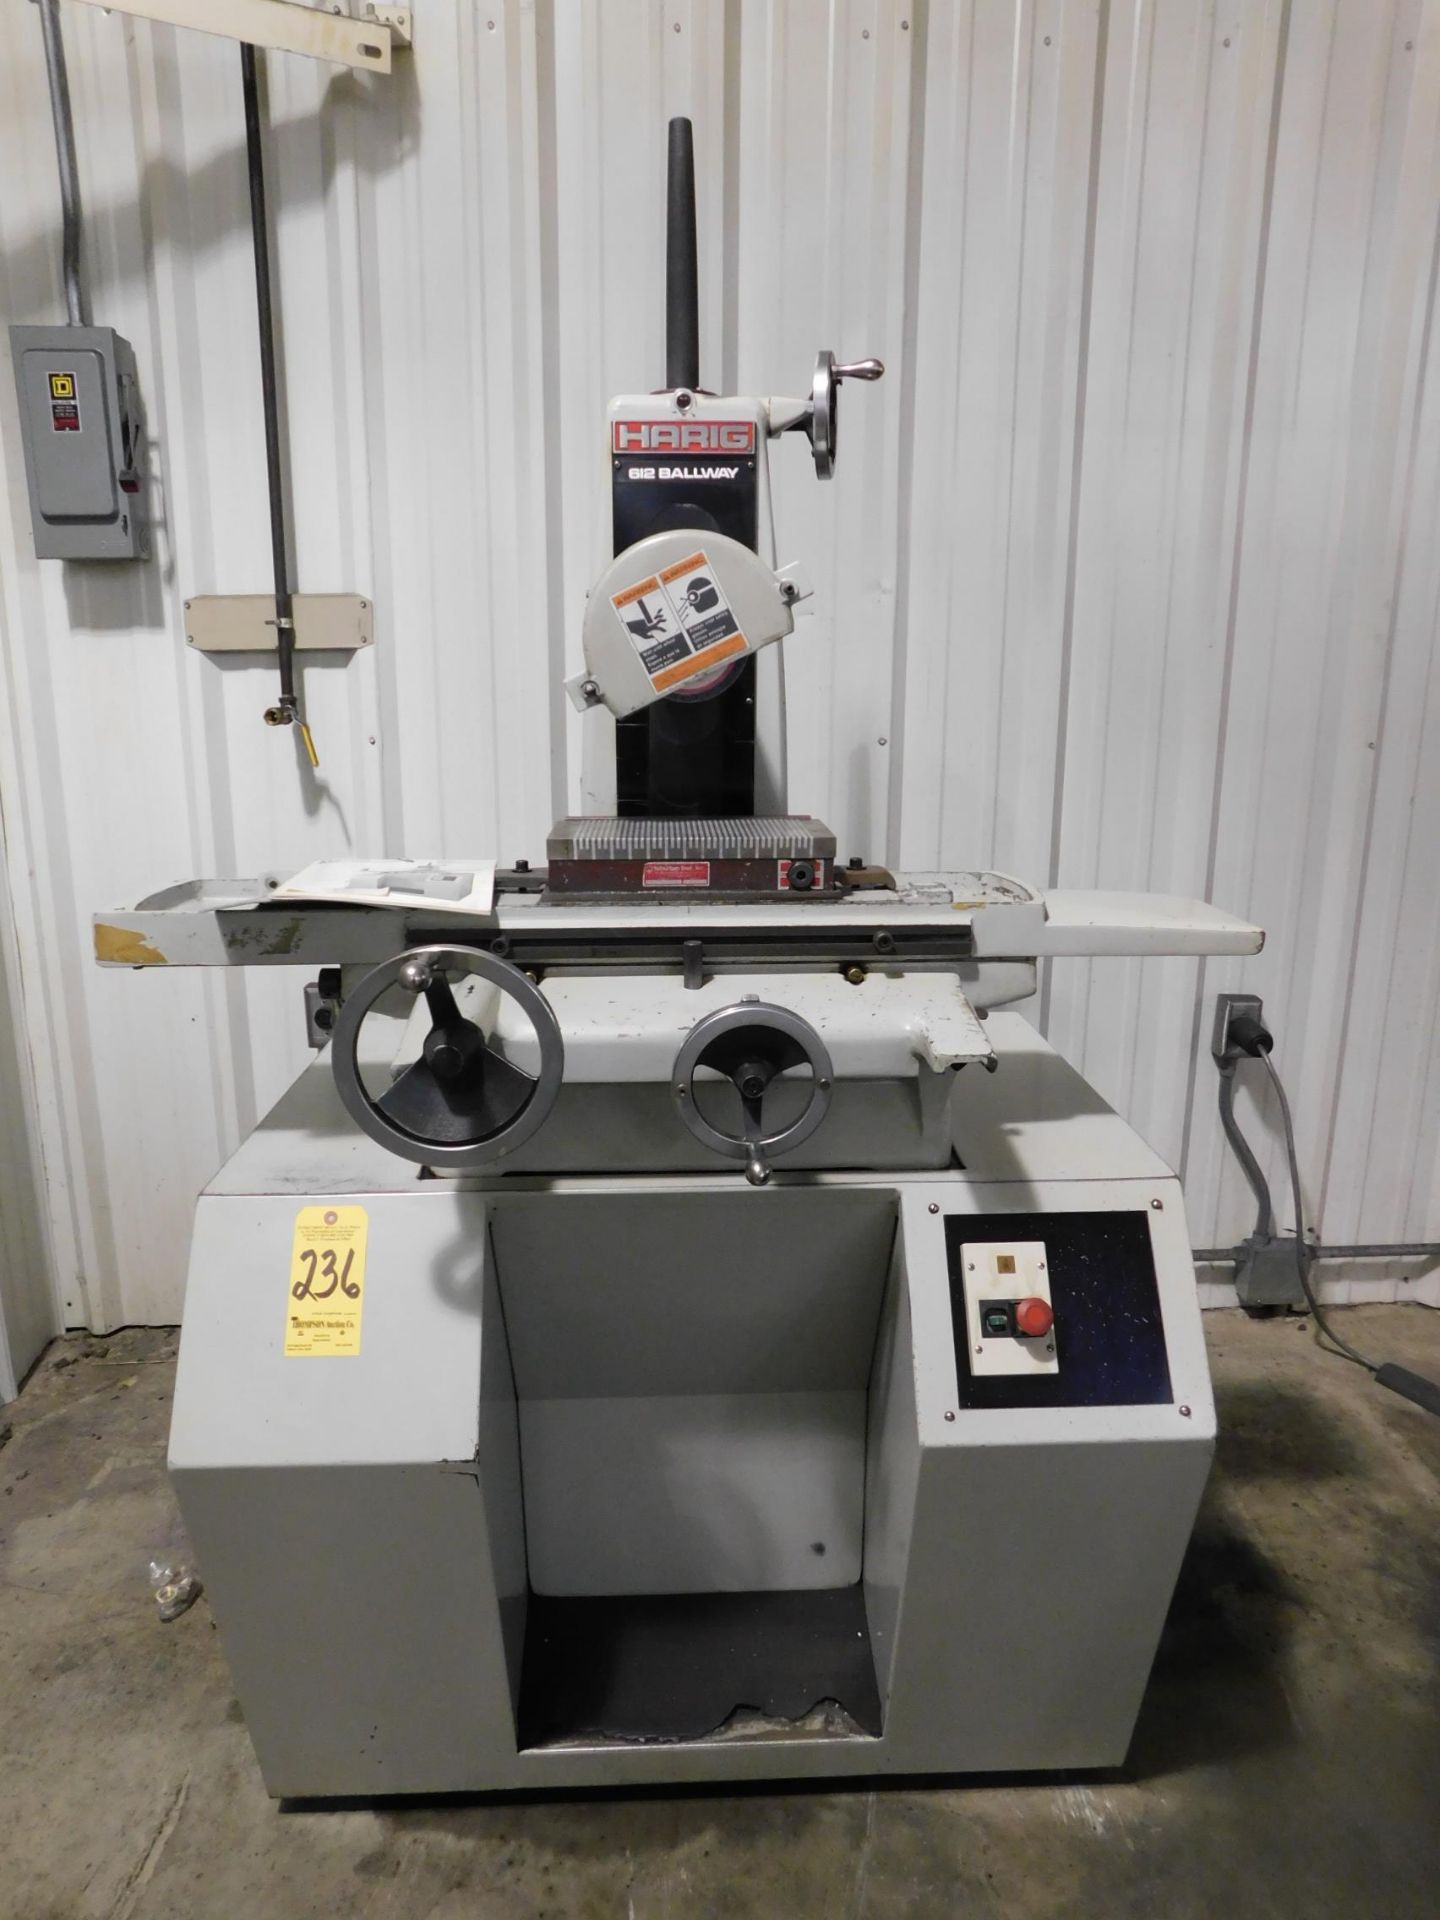 Harig 612 Ballway Hand feed Surface Grinder snB14995, w/ SuBurrban Tool 6"X12" Magnetic Chuck - Image 2 of 5